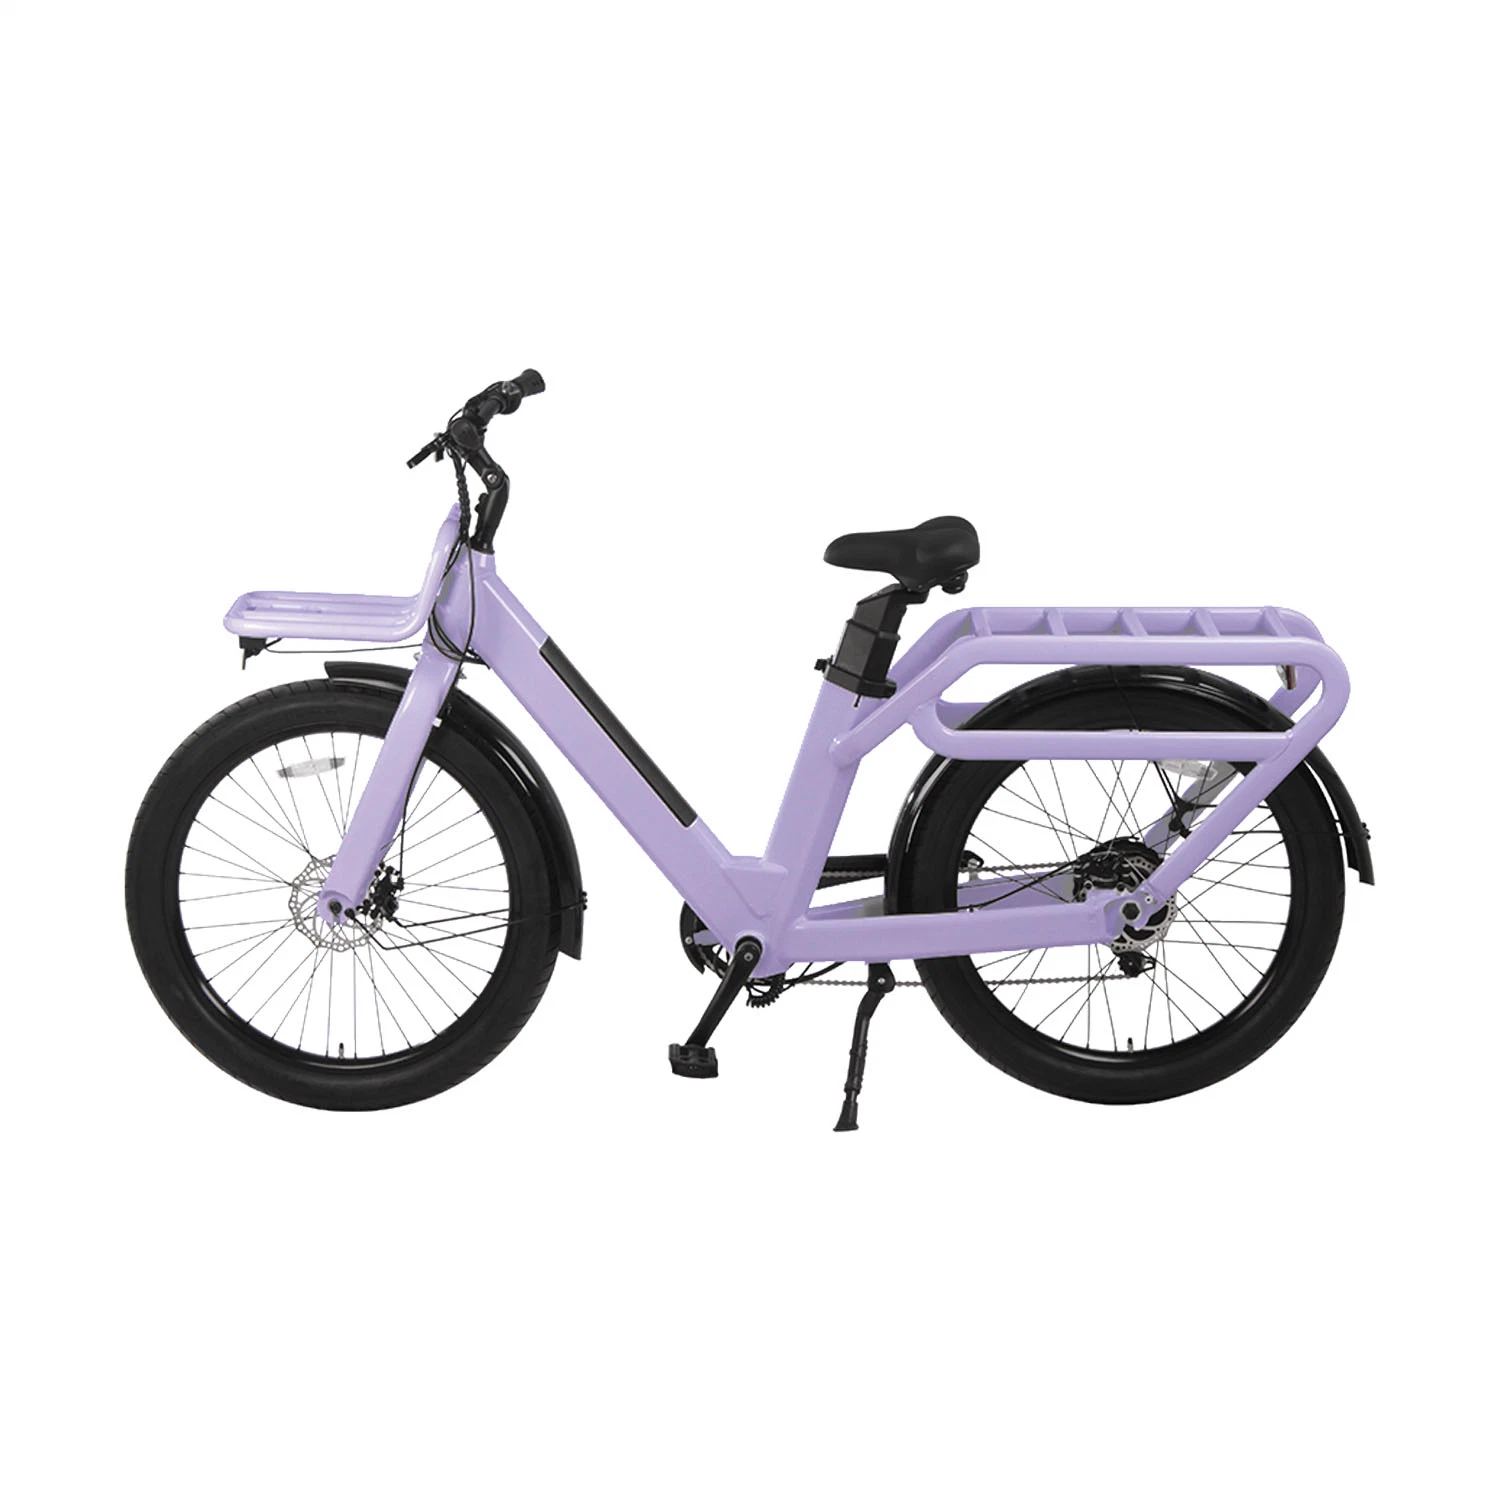 Fast Delivery 32ah+16ah 48V Double Lithium Batteries 500W Motor Electric Utility Bike